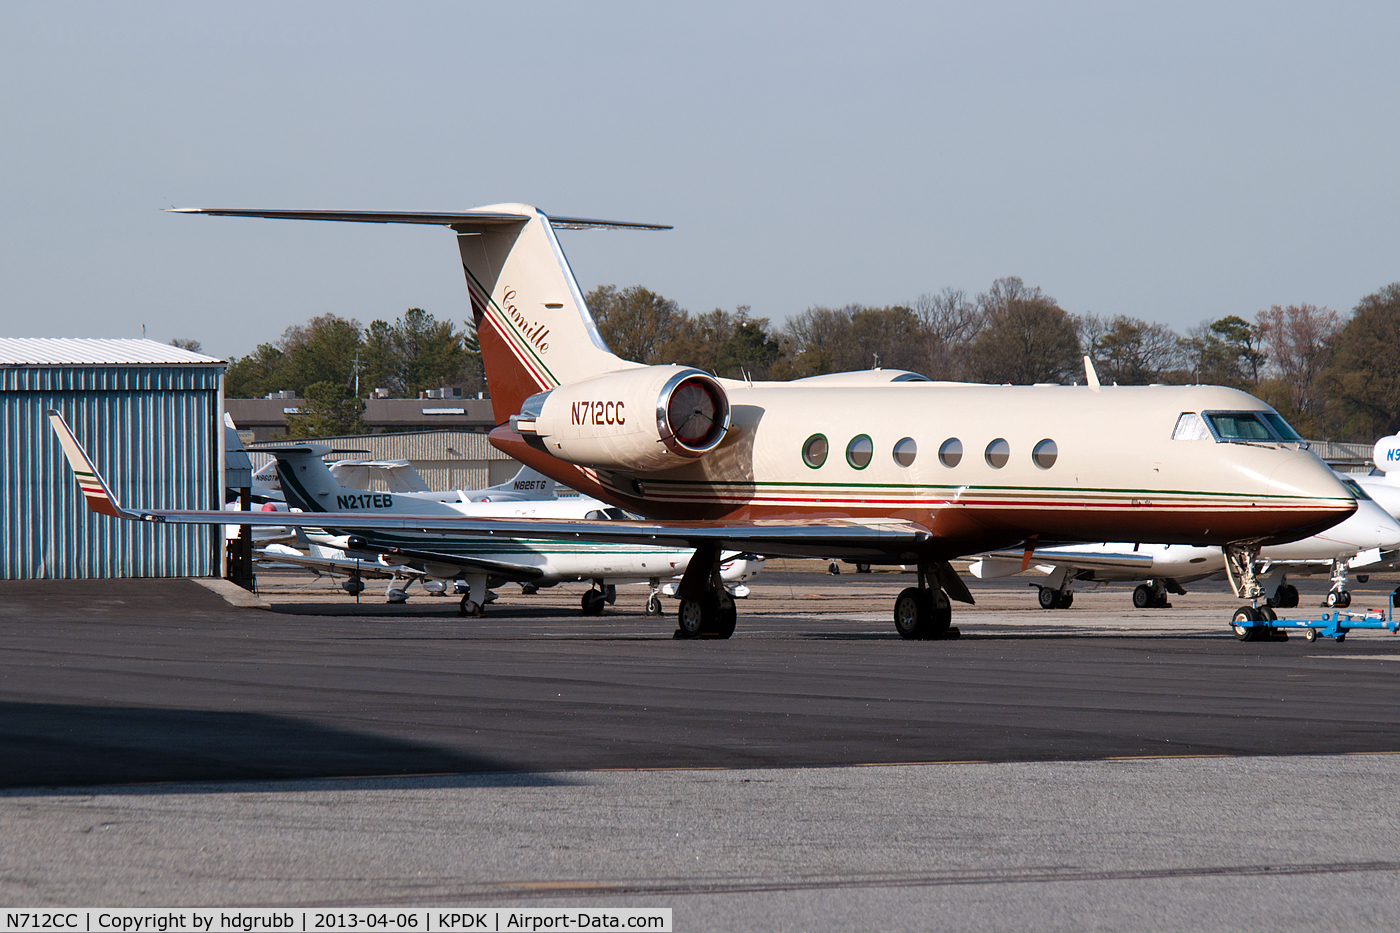 N712CC, 1987 Gulfstream Aerospace G-IV C/N 1028, Bill Cosby's G-IV parked at KPDK for the 2013 NBAA tournament.